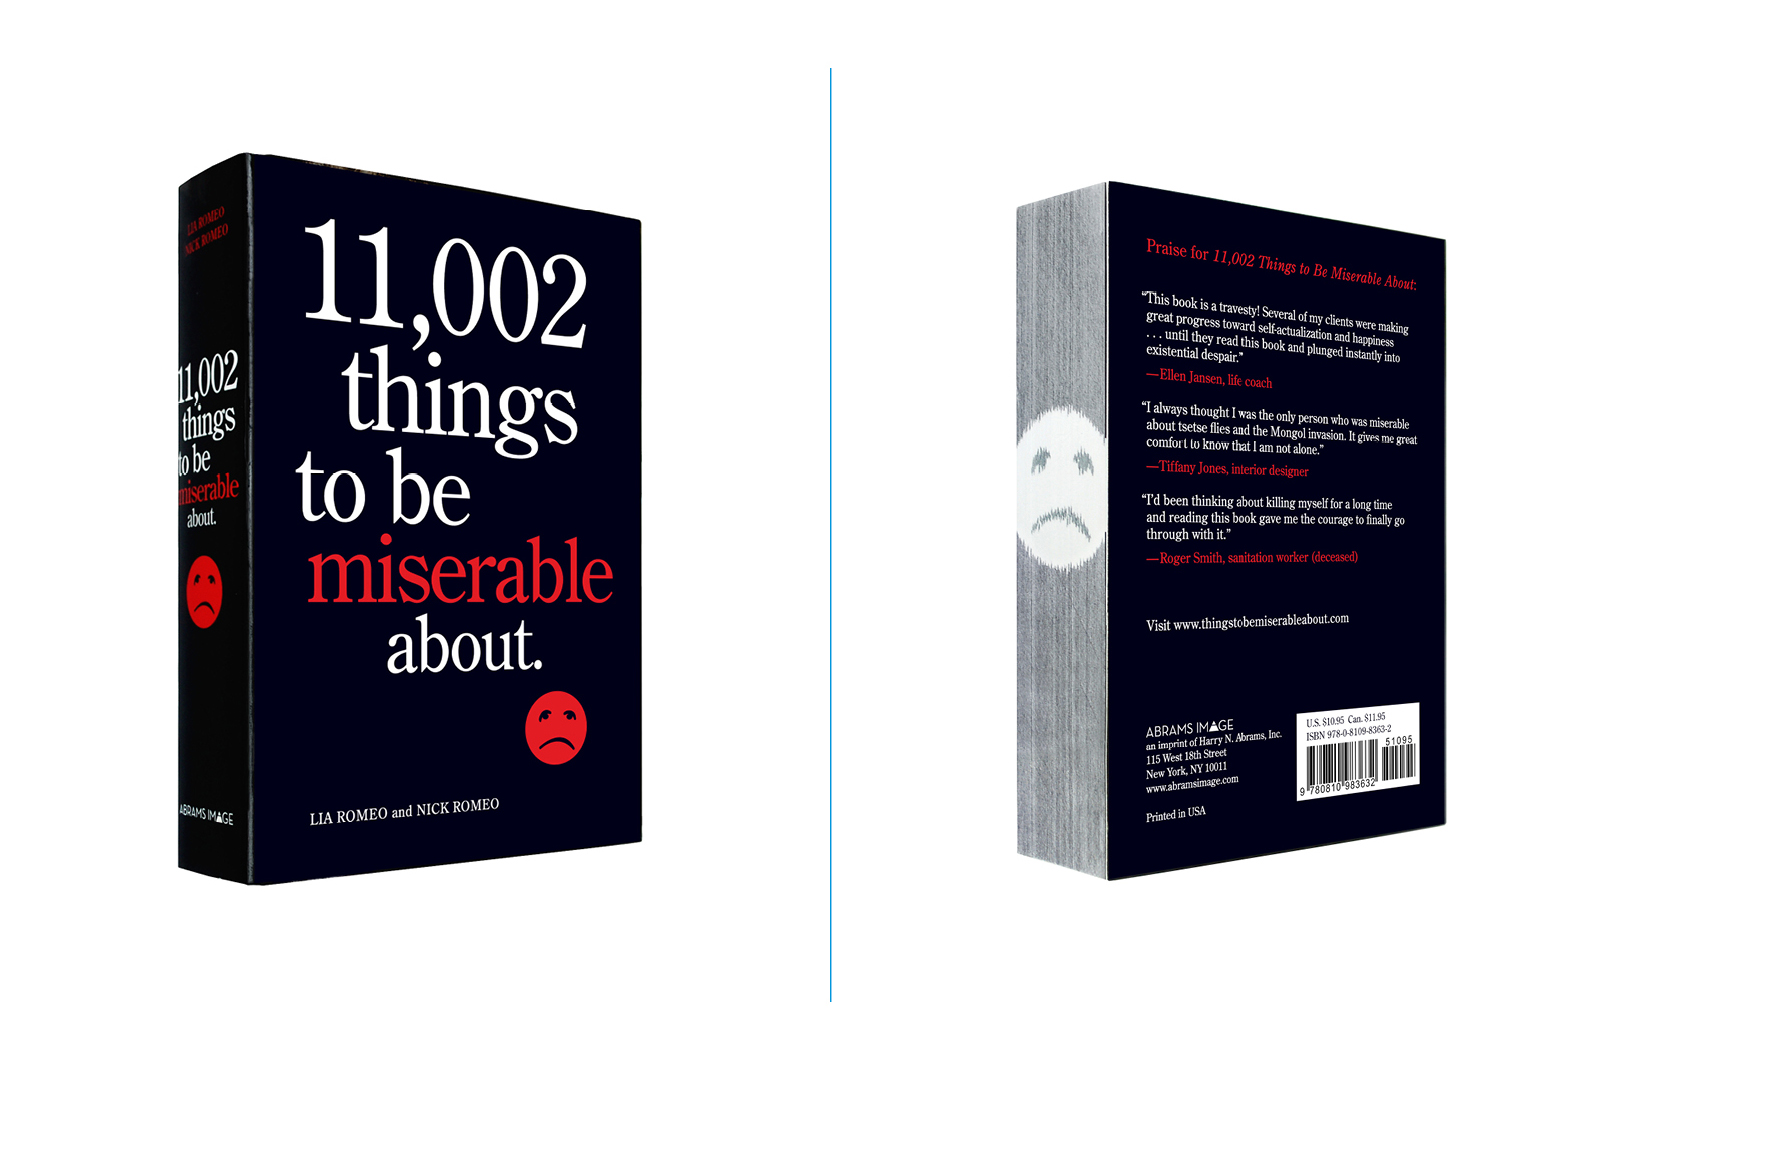   11,002 Things to Be Miserable About -  4 X 6 in., 448 pg., paperback with trim edge graphic. Design; Galen Smith, Liam Flanagan // Publisher; Abrams Image    